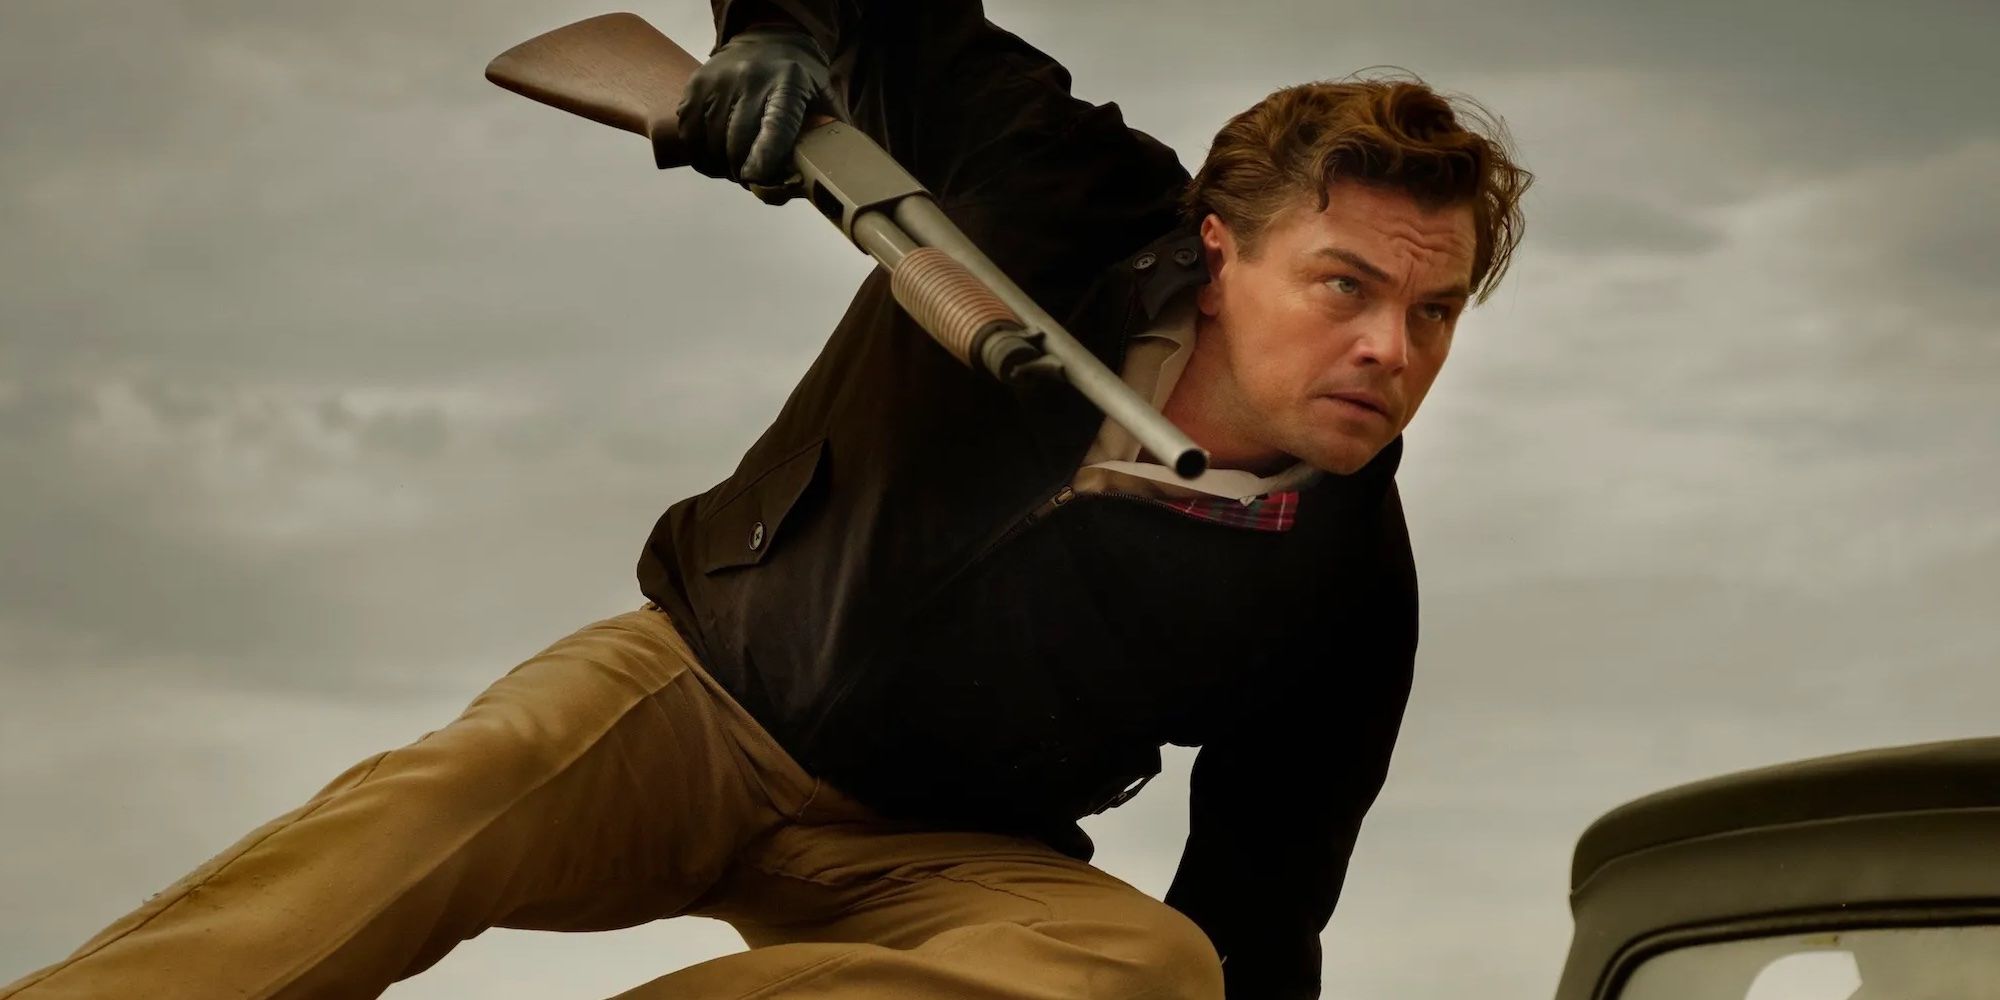 Rick Dalton (Leonardo DiCaprio) jumps over a truck while carrying a shotgun in Once Upon a Time in Hollywood.